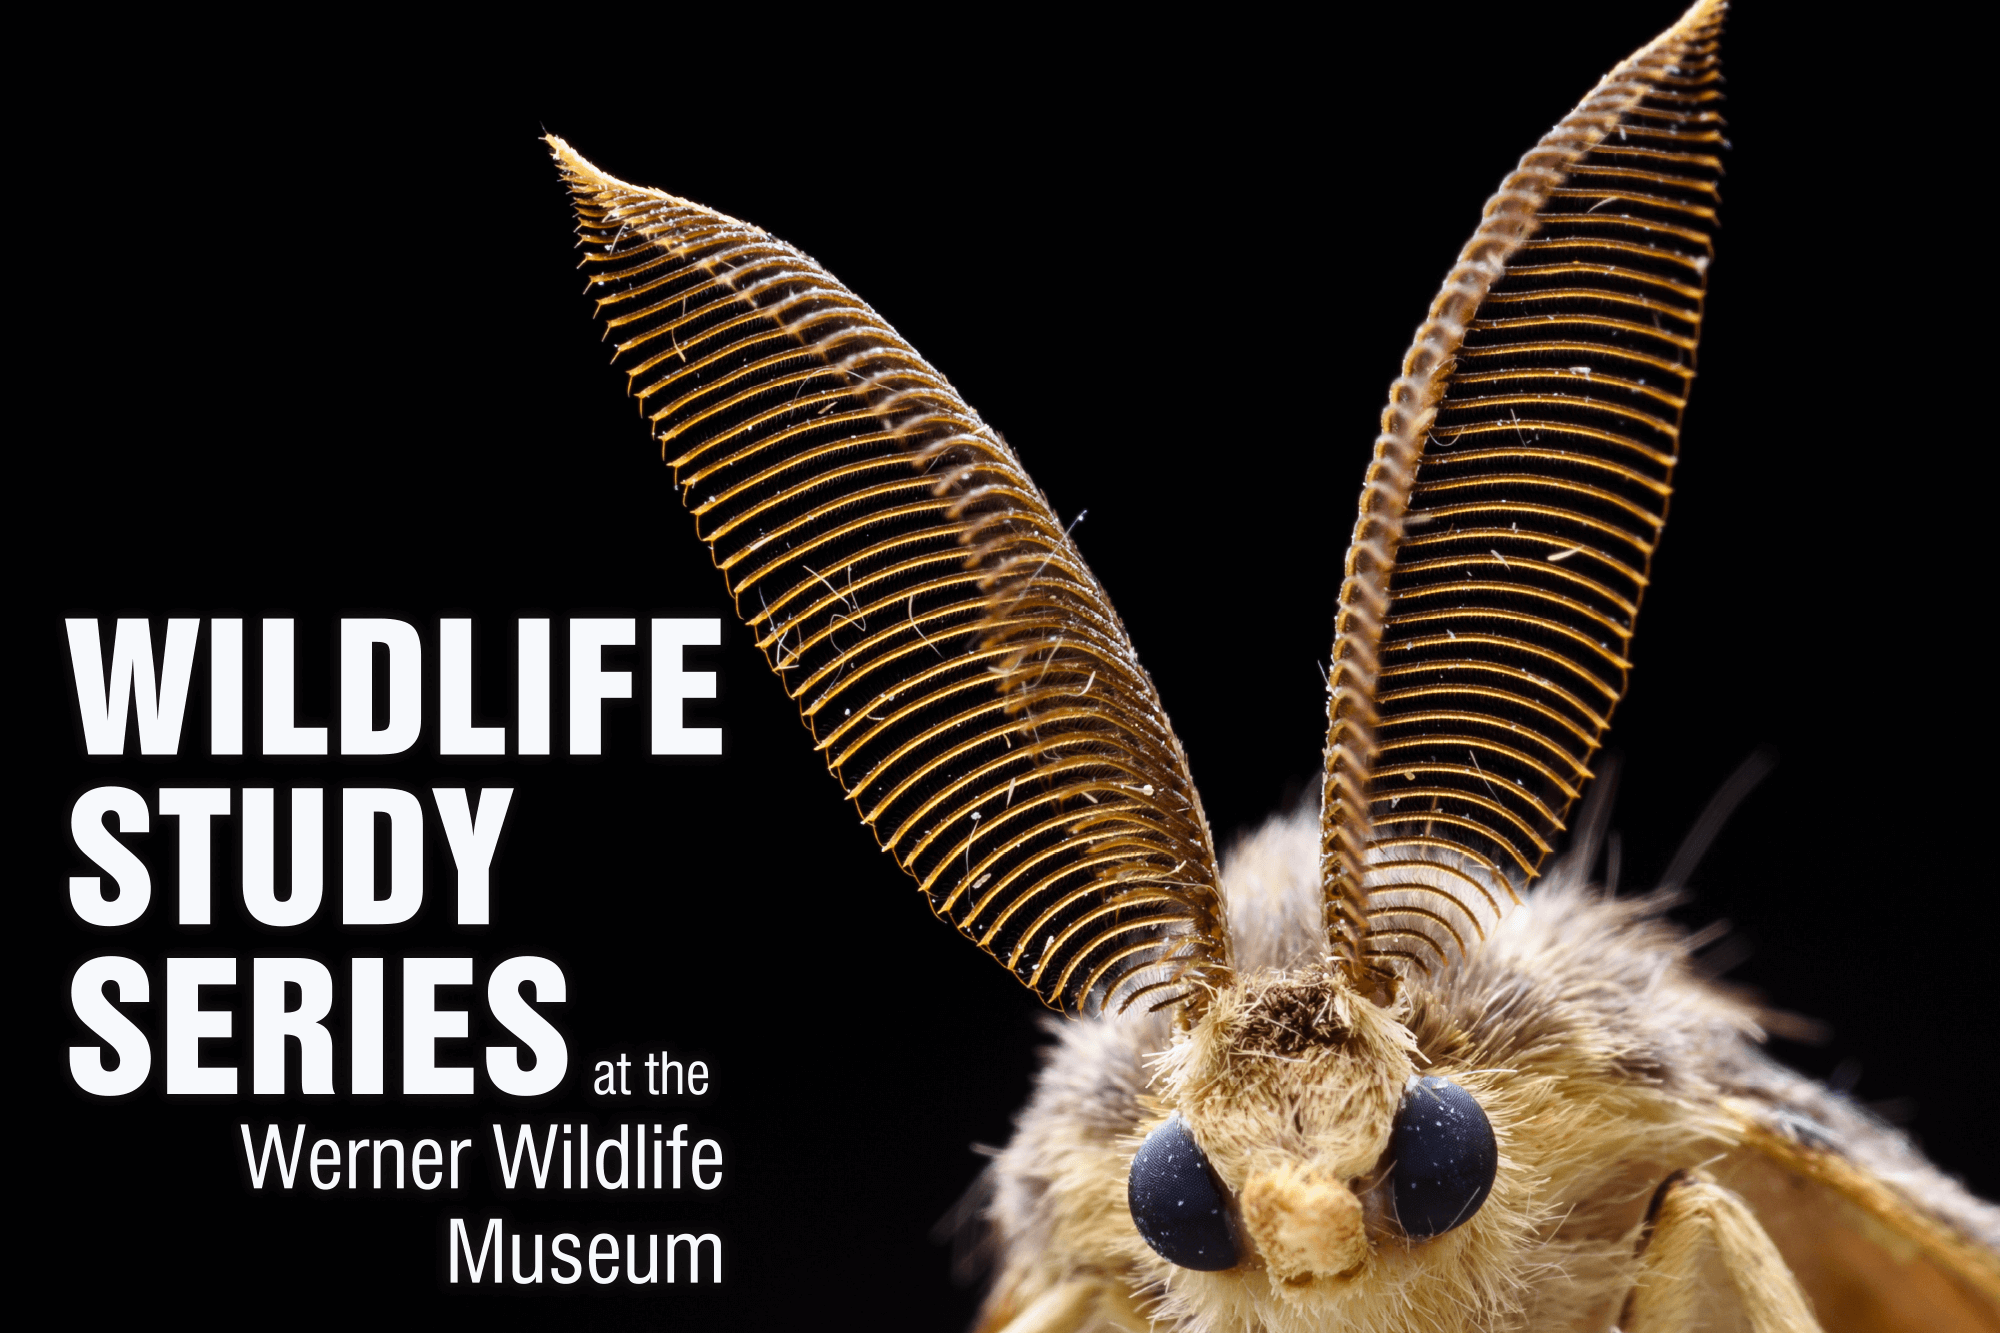 Closeup photograph of a moth to advertise the Wildlife Study Series.